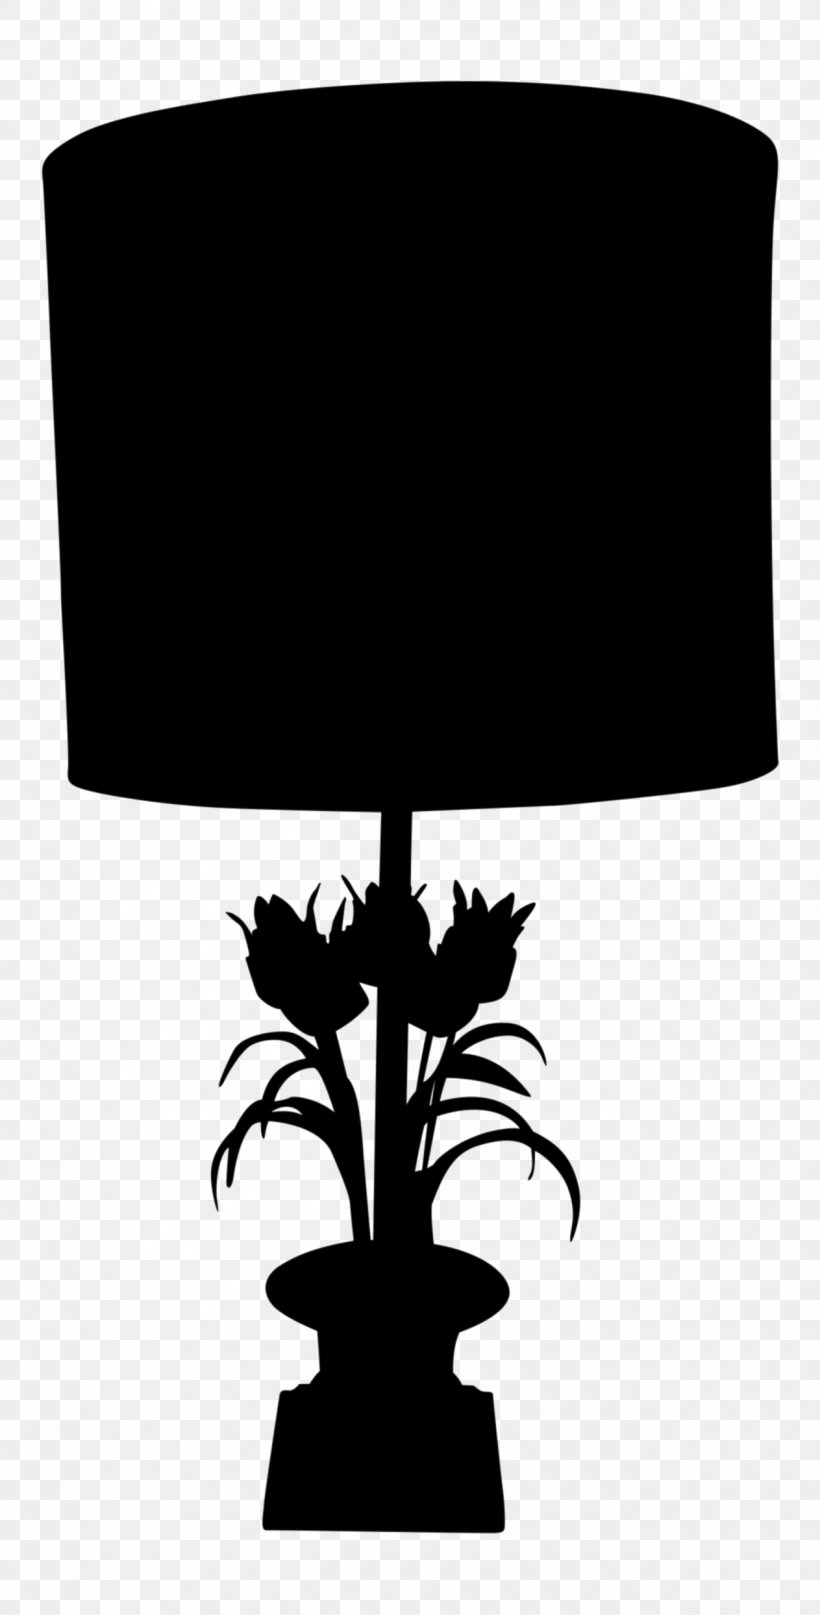 Lamp Shades Product Design Black M, PNG, 1263x2489px, Lamp Shades, Black, Black M, Blackandwhite, Interior Design Download Free